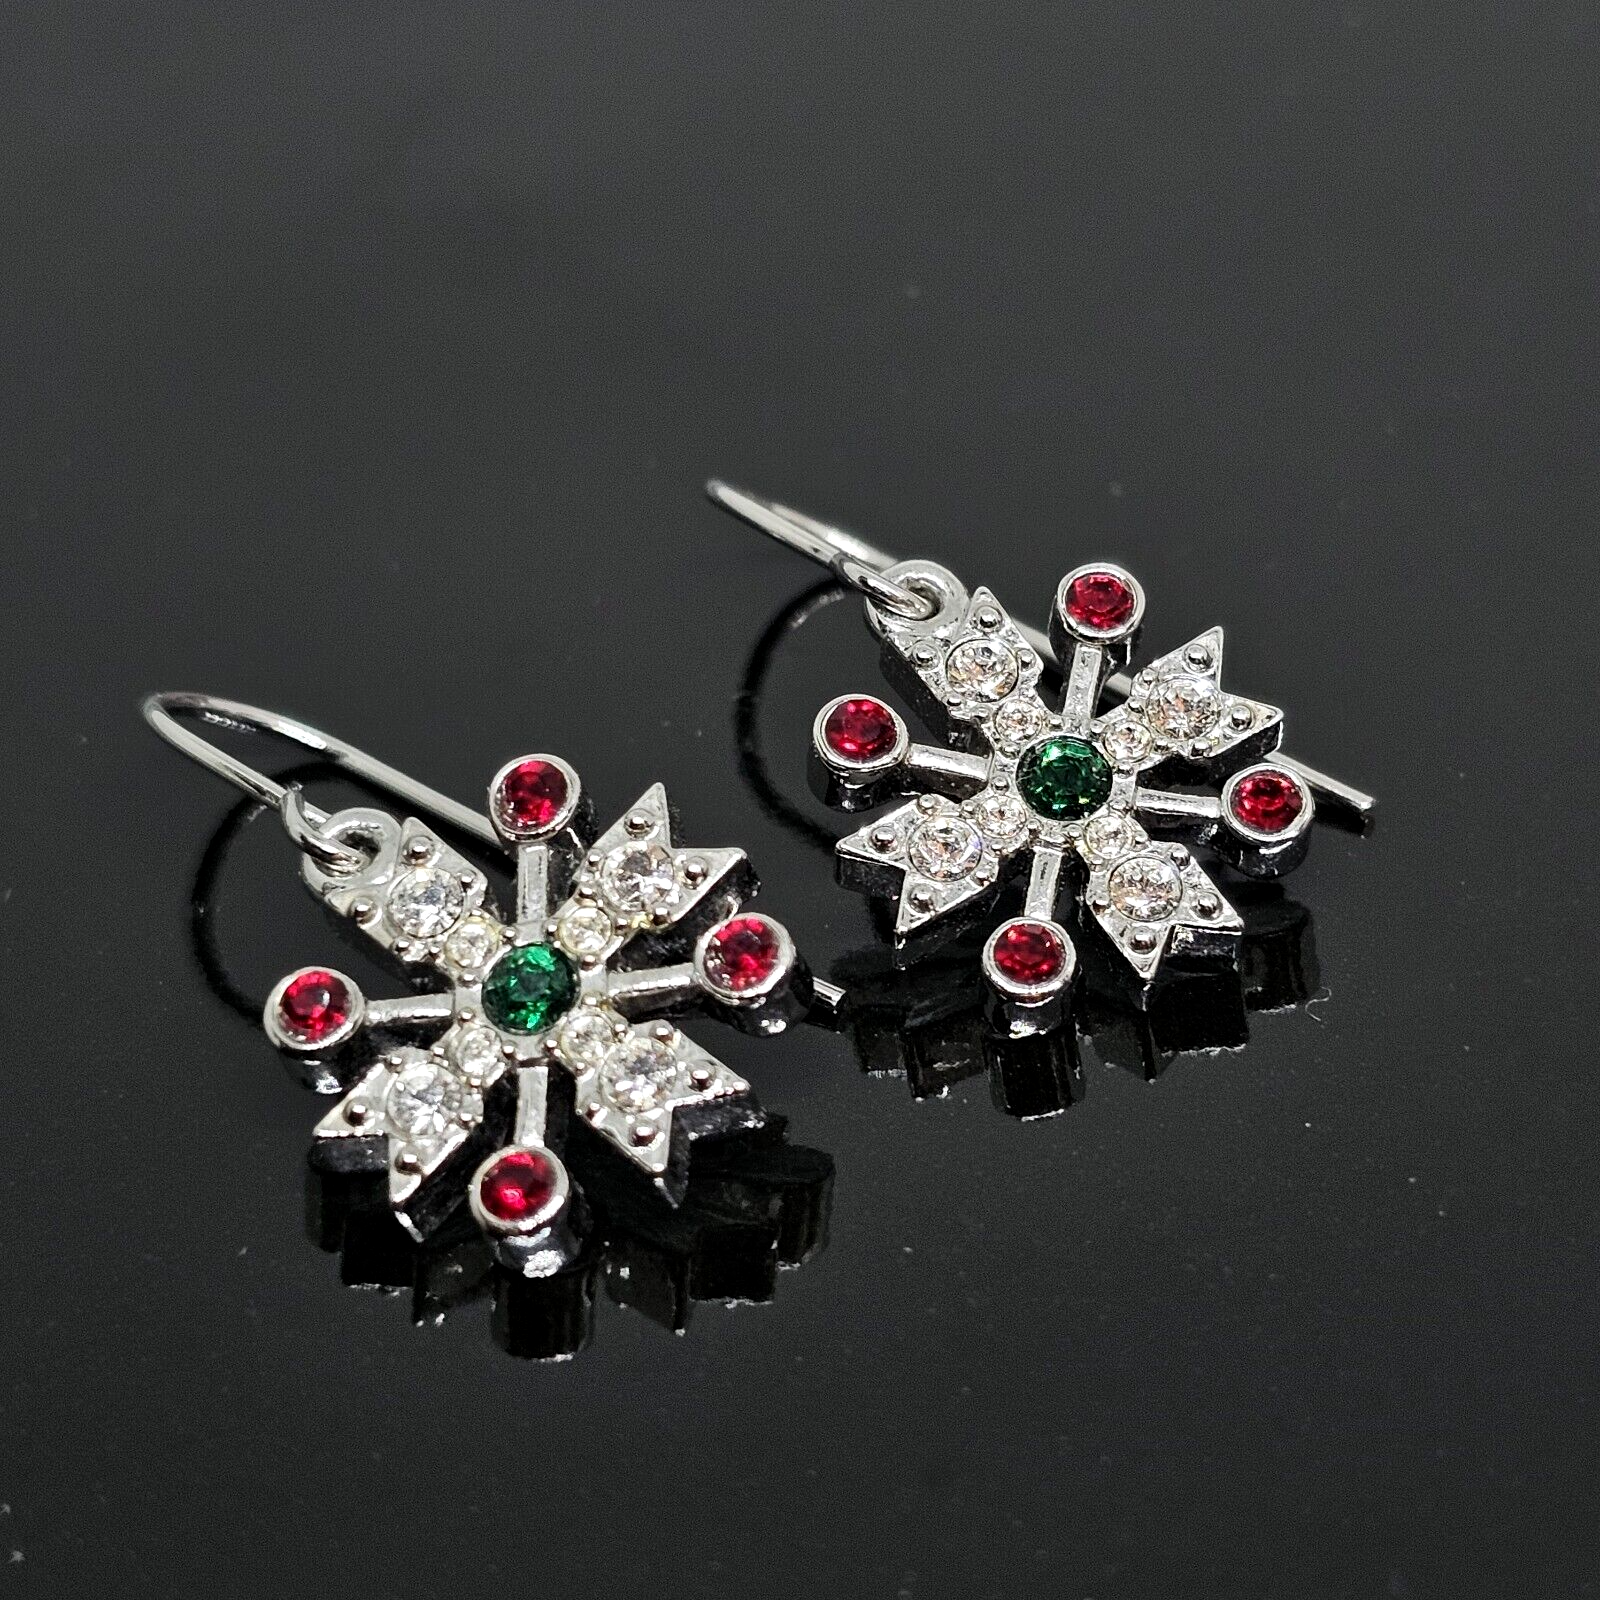 Primary image for Swarovski Swan White Green Red Crystal Snowflake Dangle Earrings Silver Tone